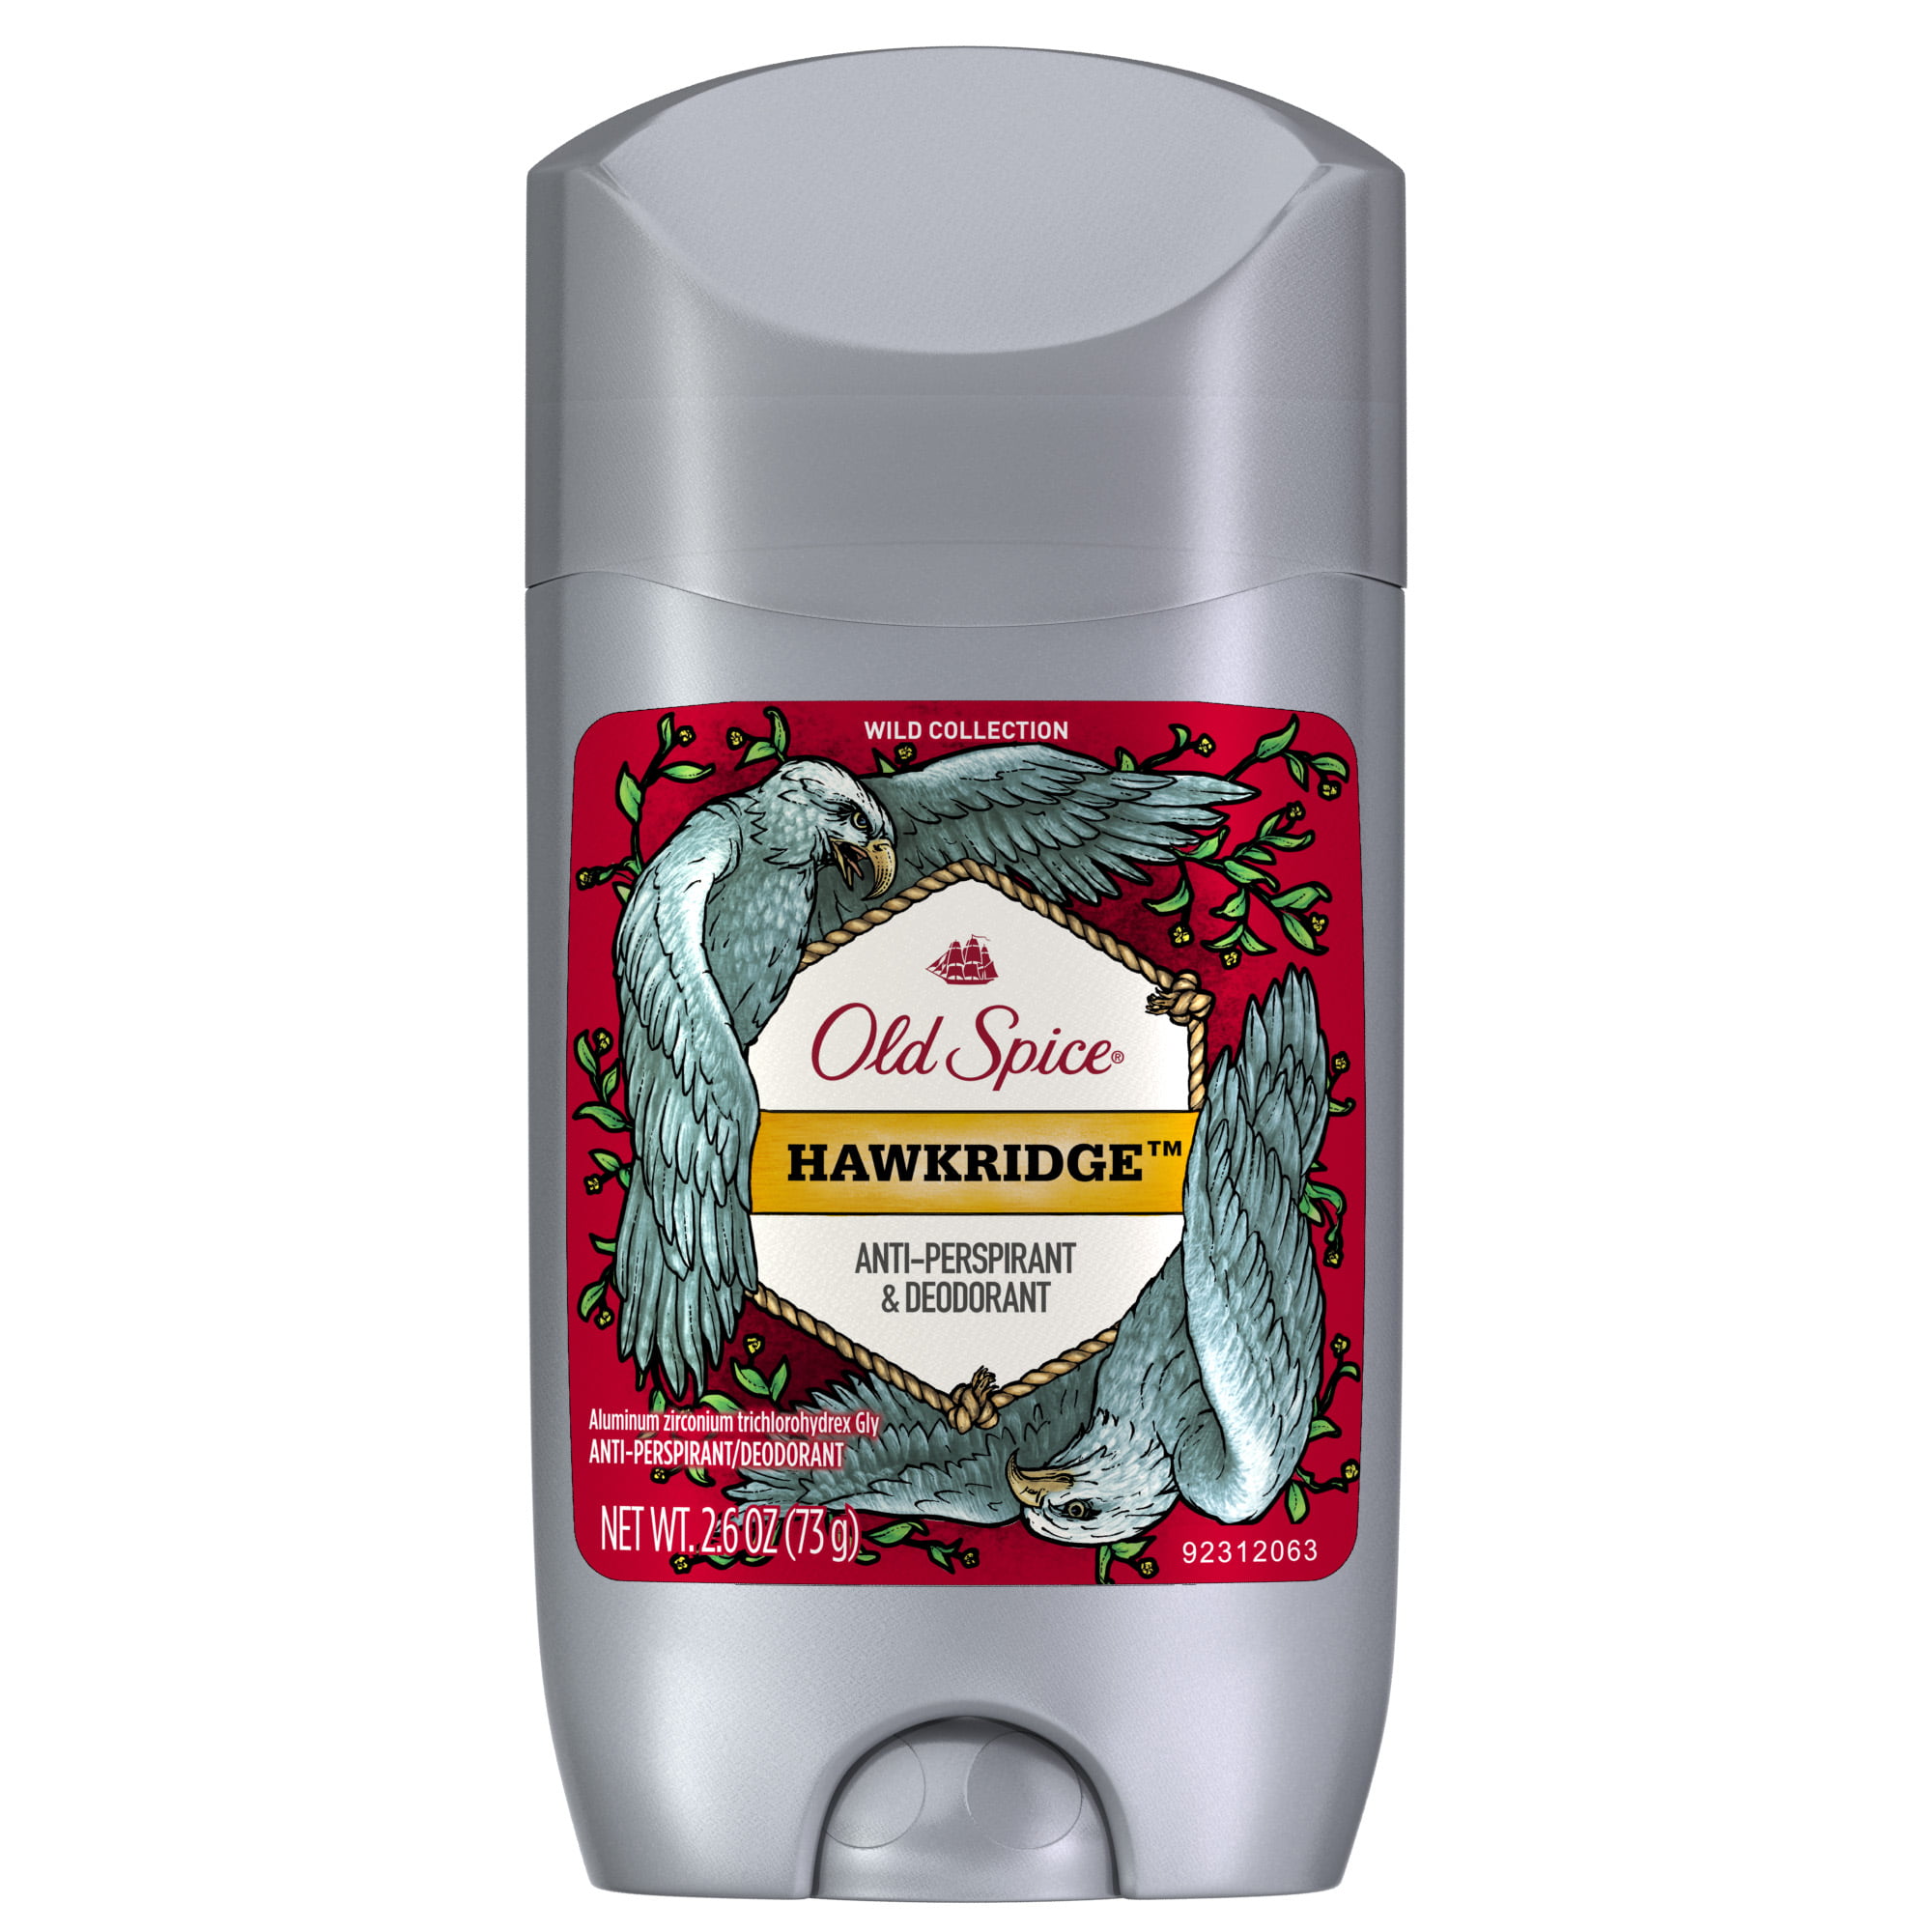 Wild collection. Old Spice Wild collection. Old Spice Wild collection 2021.